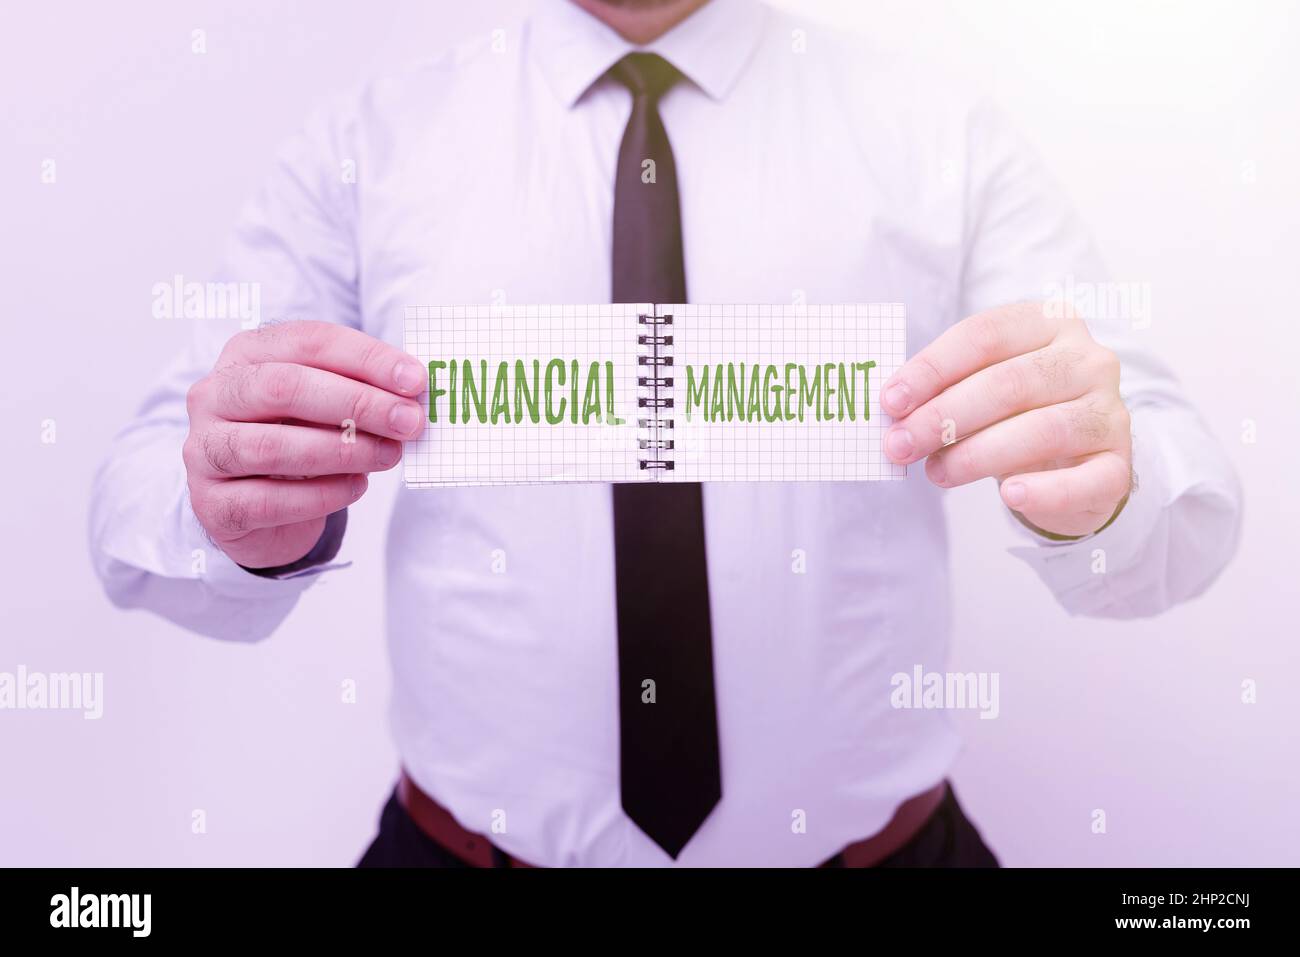 Handwriting text Financial Management, Internet Concept efficient and effective way to Manage Money and Funds Presenting New Plans And Ideas Demonstra Stock Photo